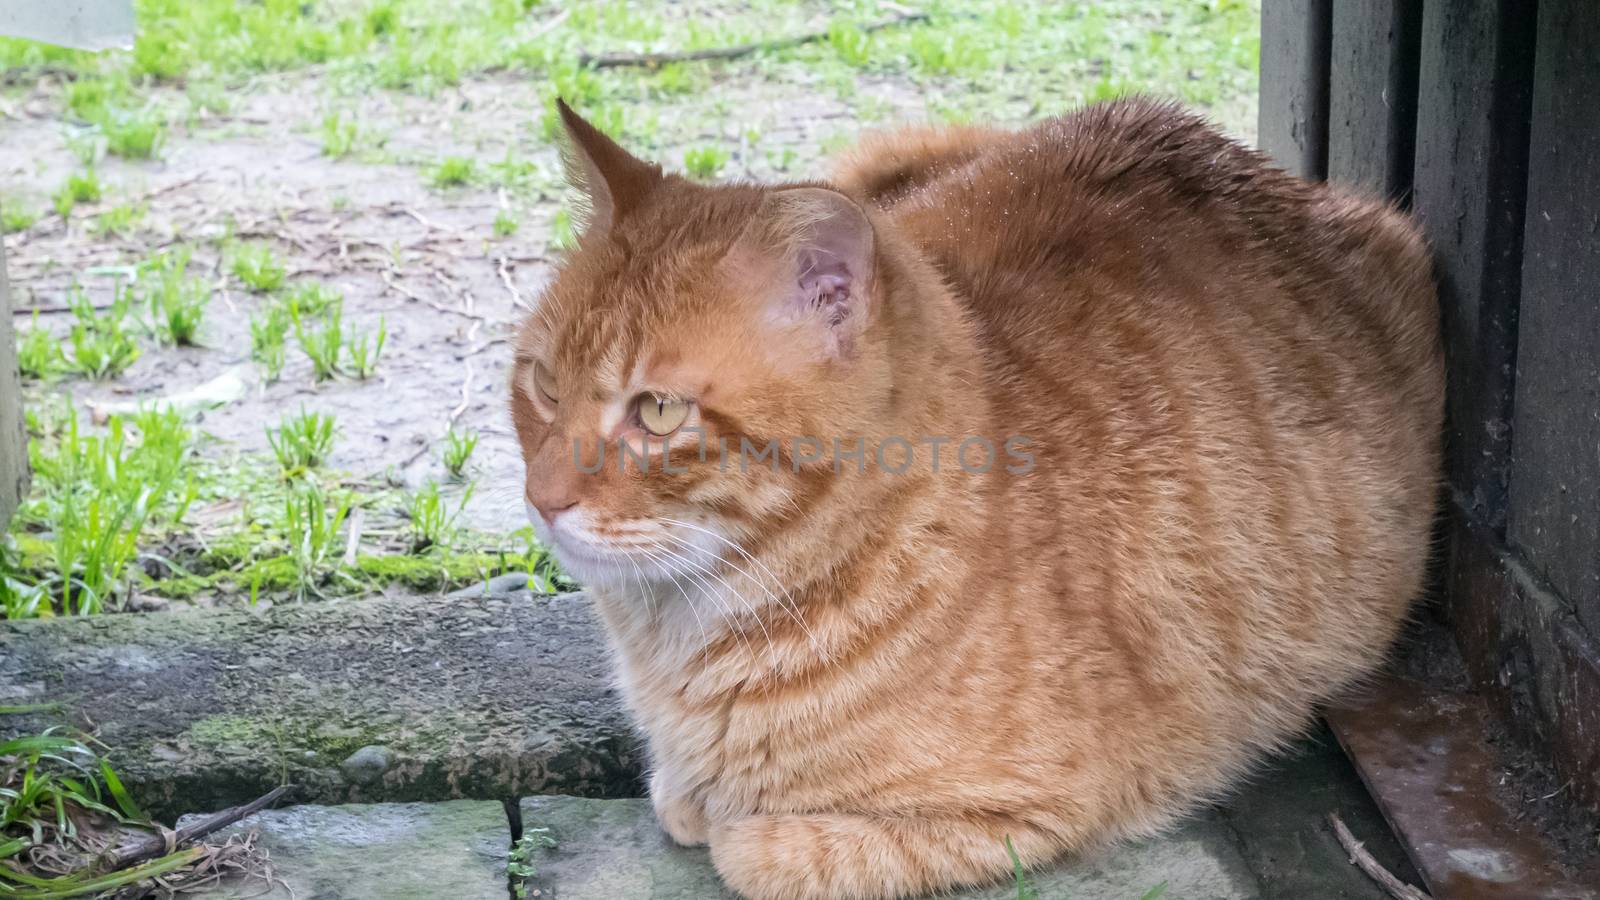 The cute tabby cat sitting on ground in garden.